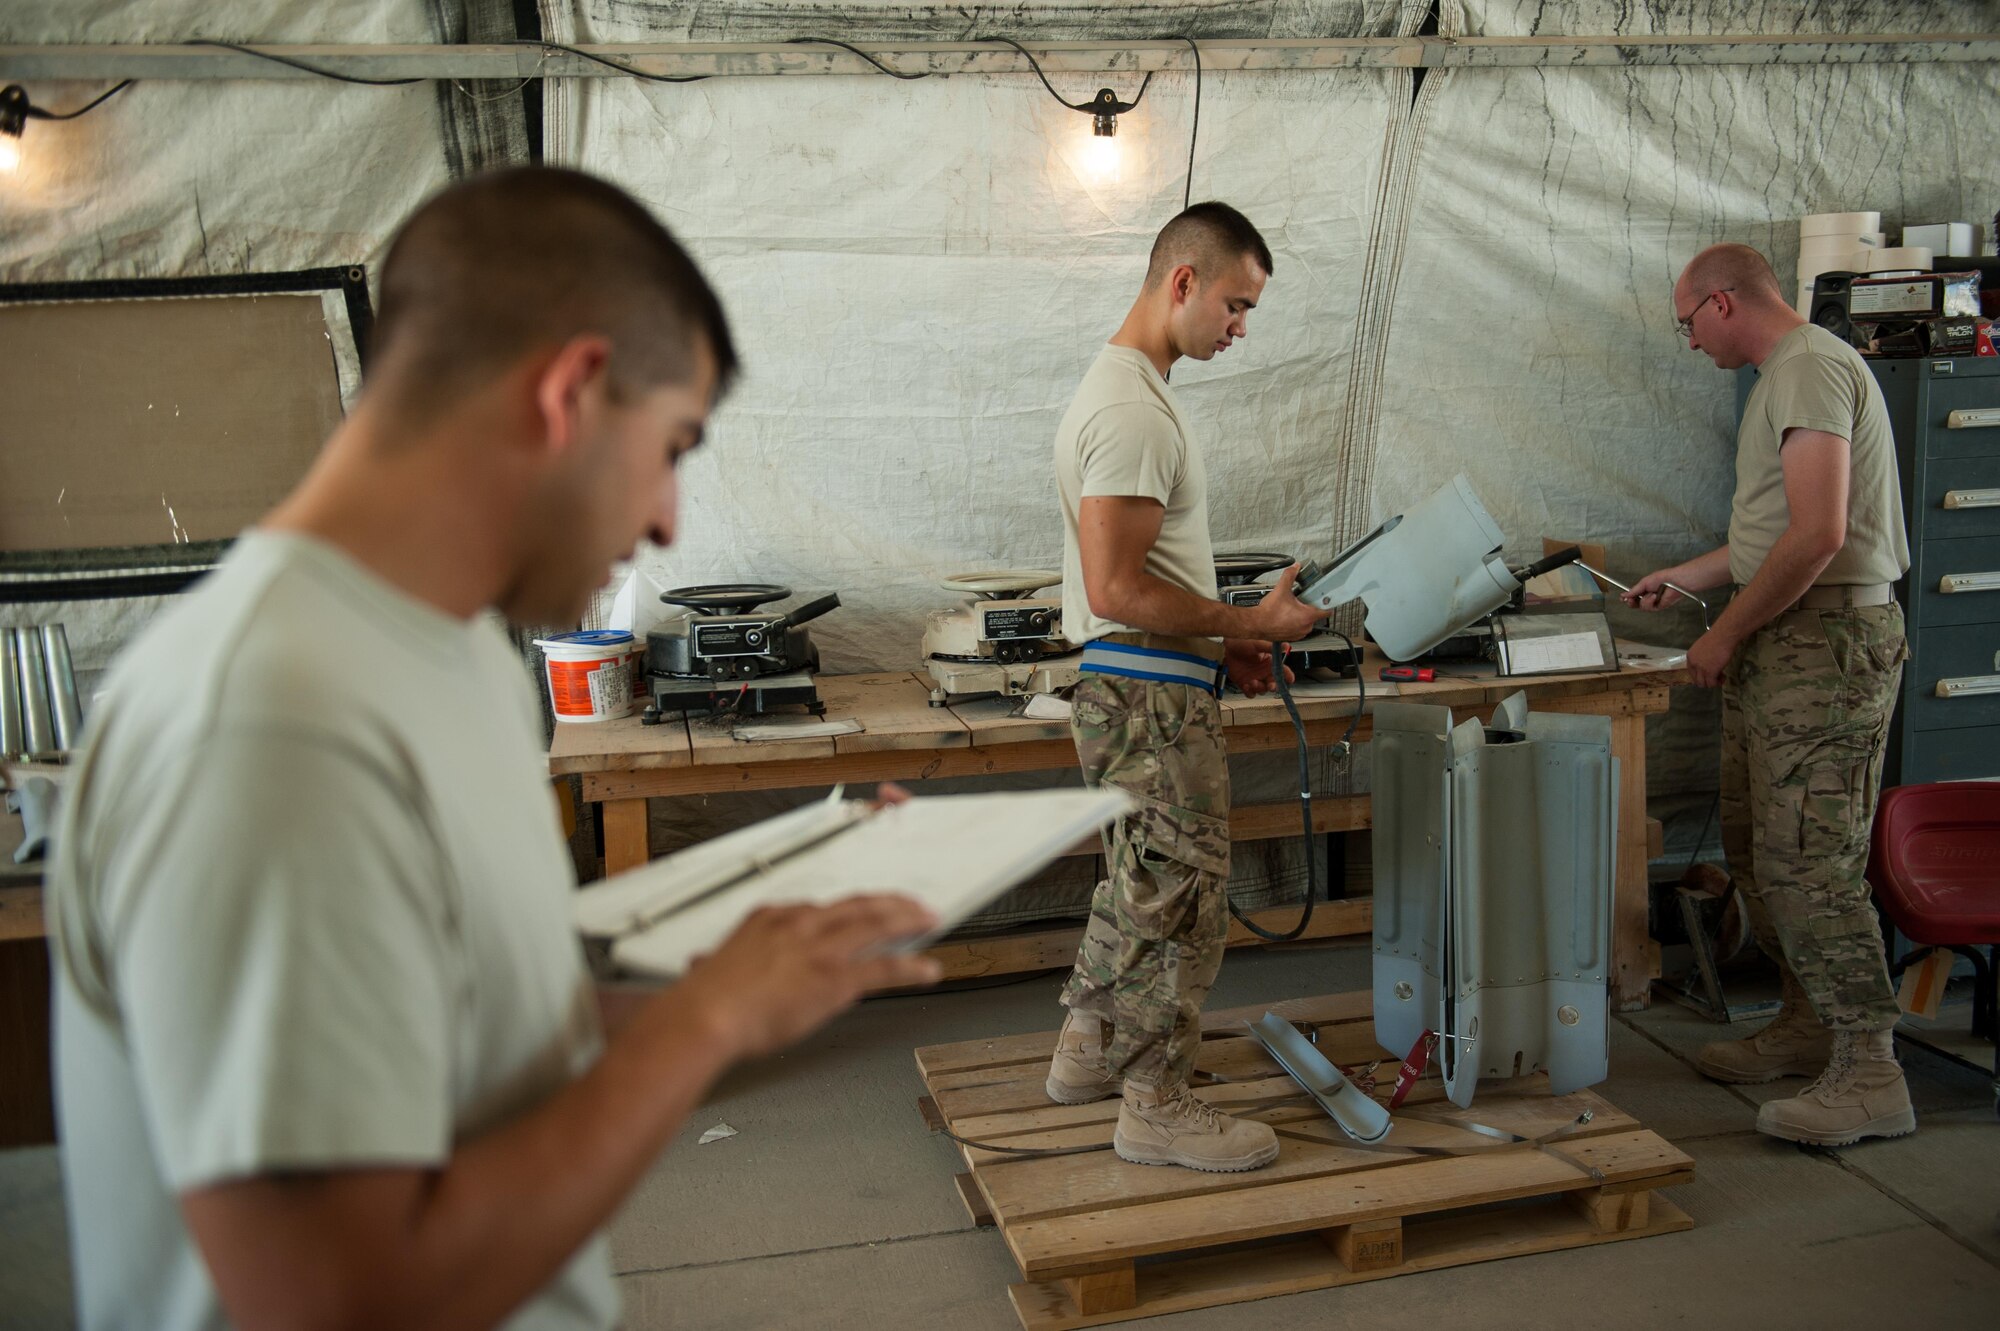 U.S. Air Force Airman 1st Class Matthew Lopez, center, 62nd Expeditionary Reconnaissance Squadron munitions systems technician, builds a GPS-guided GBU-49 weapon at Kandahar Airfield, Afghanistan, Aug. 15, 2015.  The 62nd ERS Munitions Flight ensures that every munition loaded onto an MQ-1 Predator and MQ-9 Reaper will perform as expected when used. (U.S. Air Force photo by Tech. Sgt. Joseph Swafford/Released)